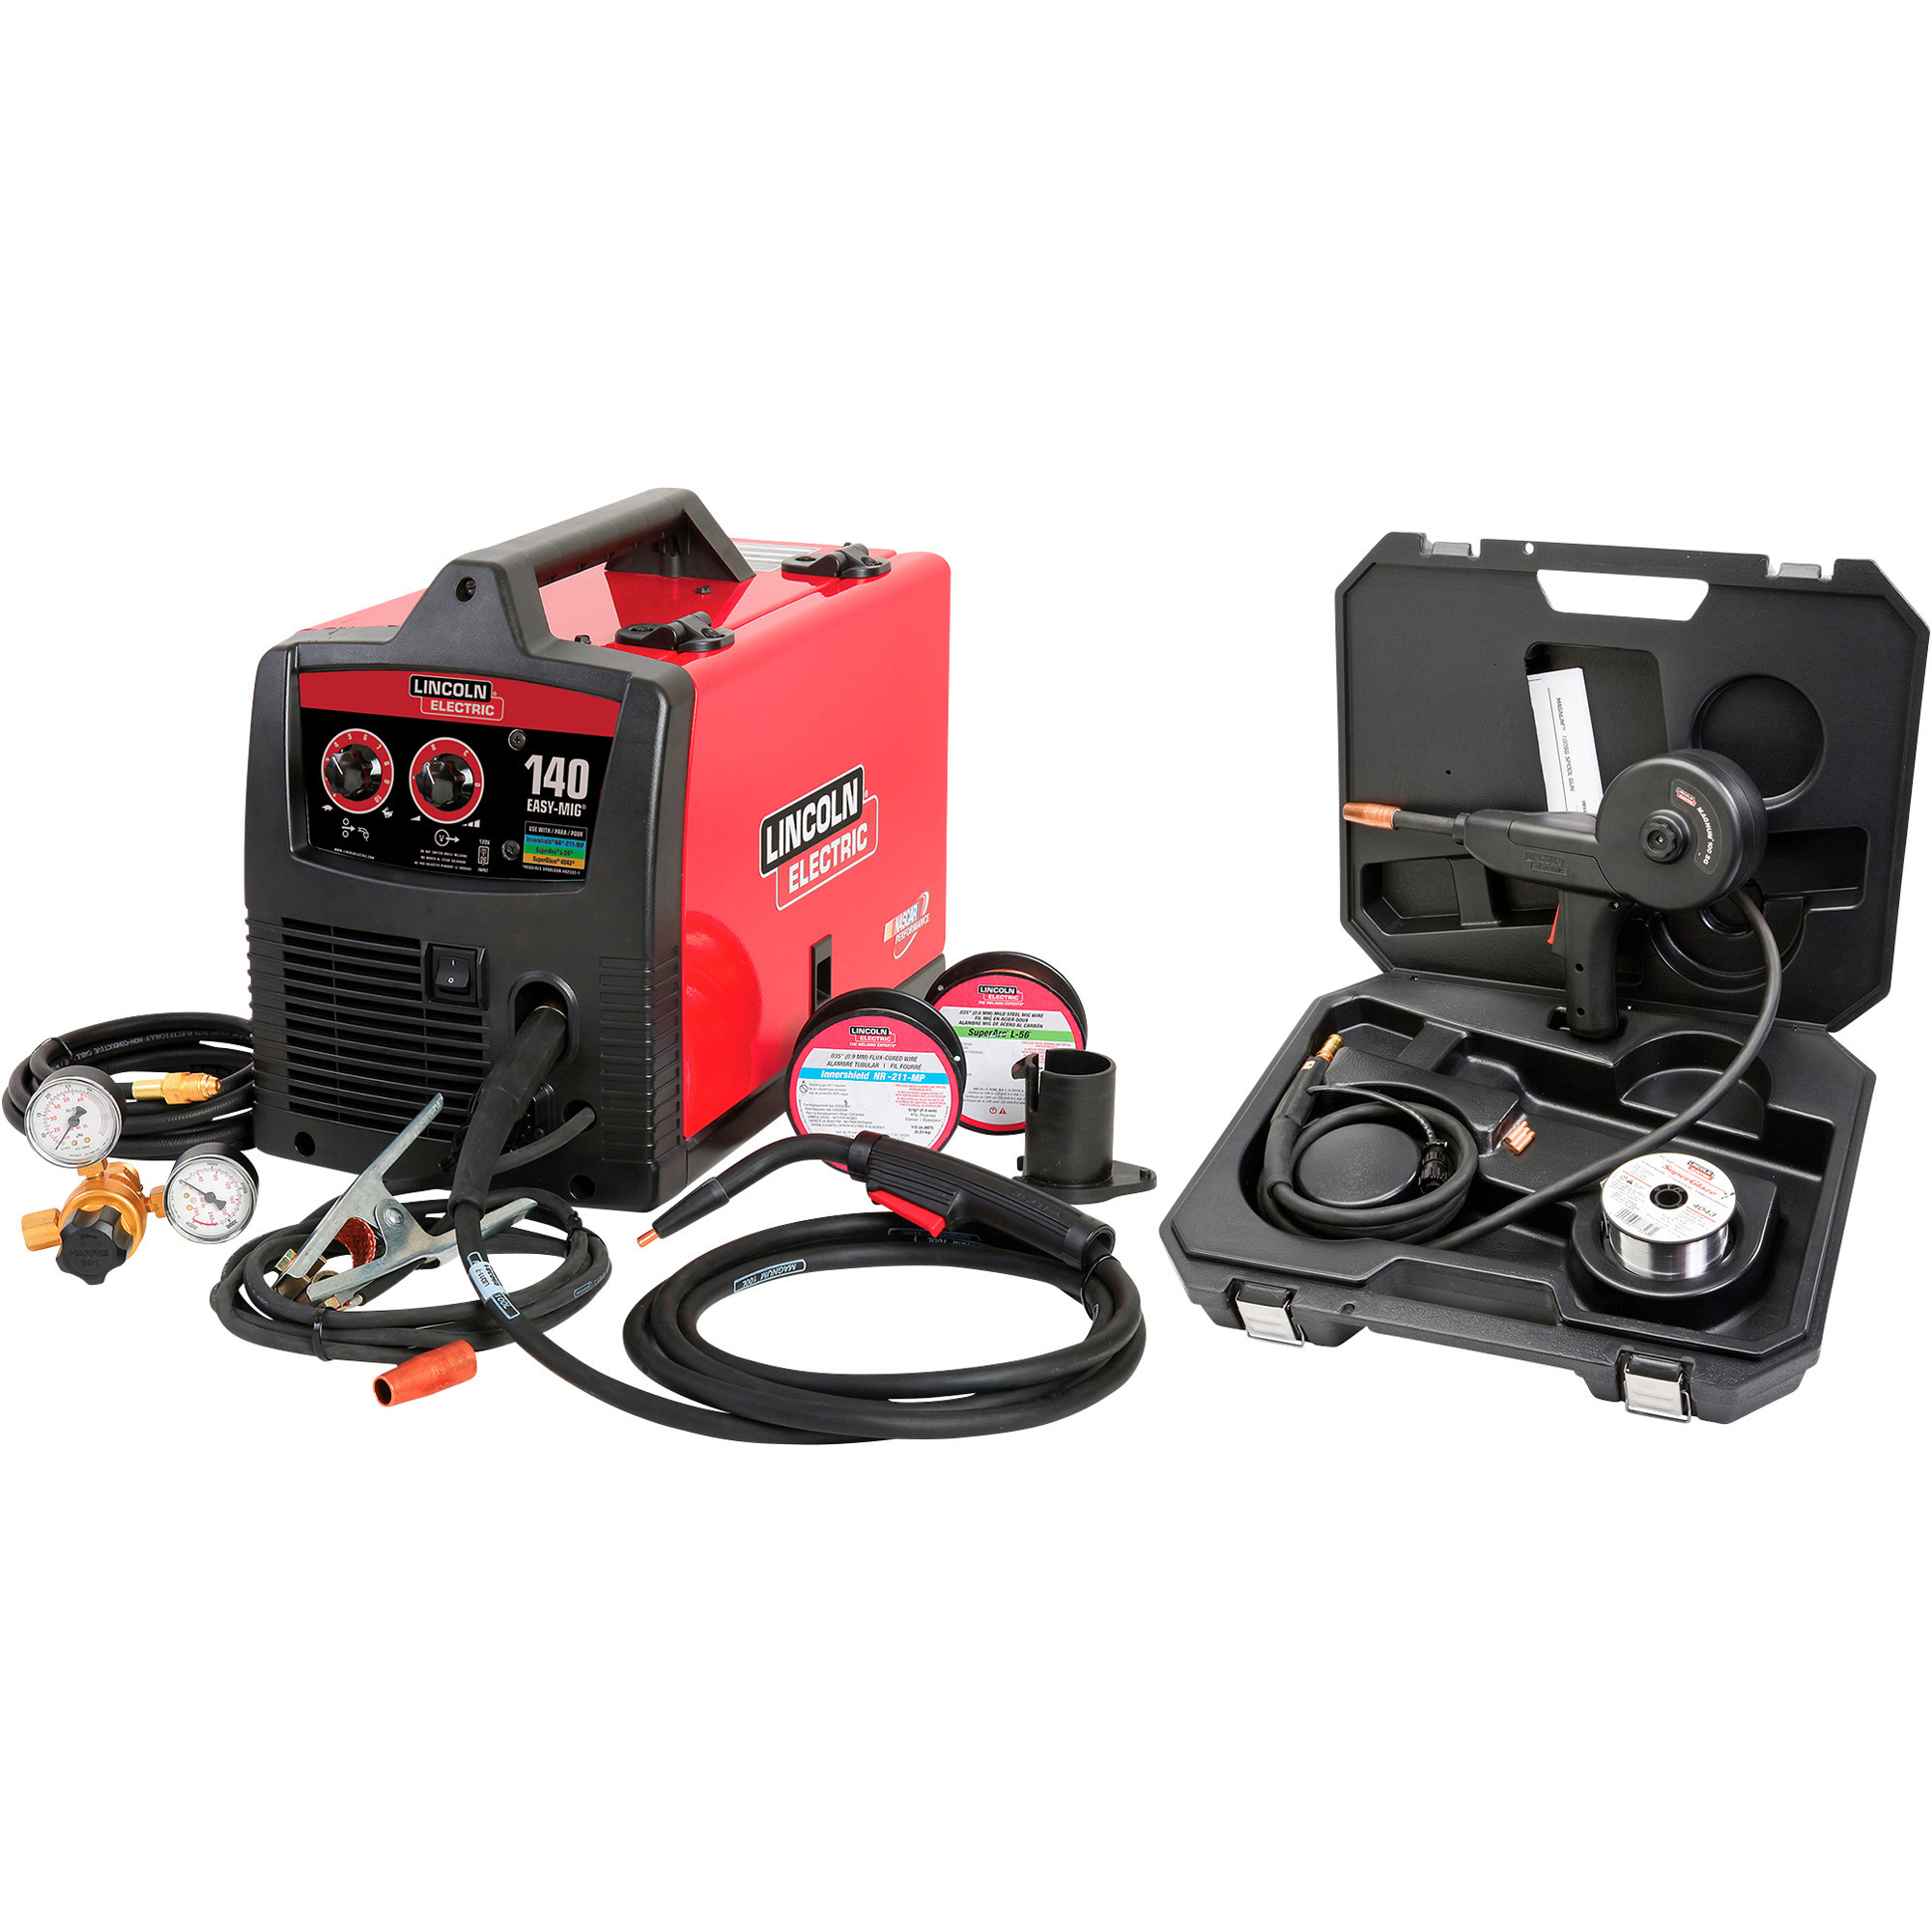 Lincoln Electric Easy MIG 140 Flux-Core/MIG Welder, Transformer, 115V, 30-140 Amp Output with Included Spool Gun